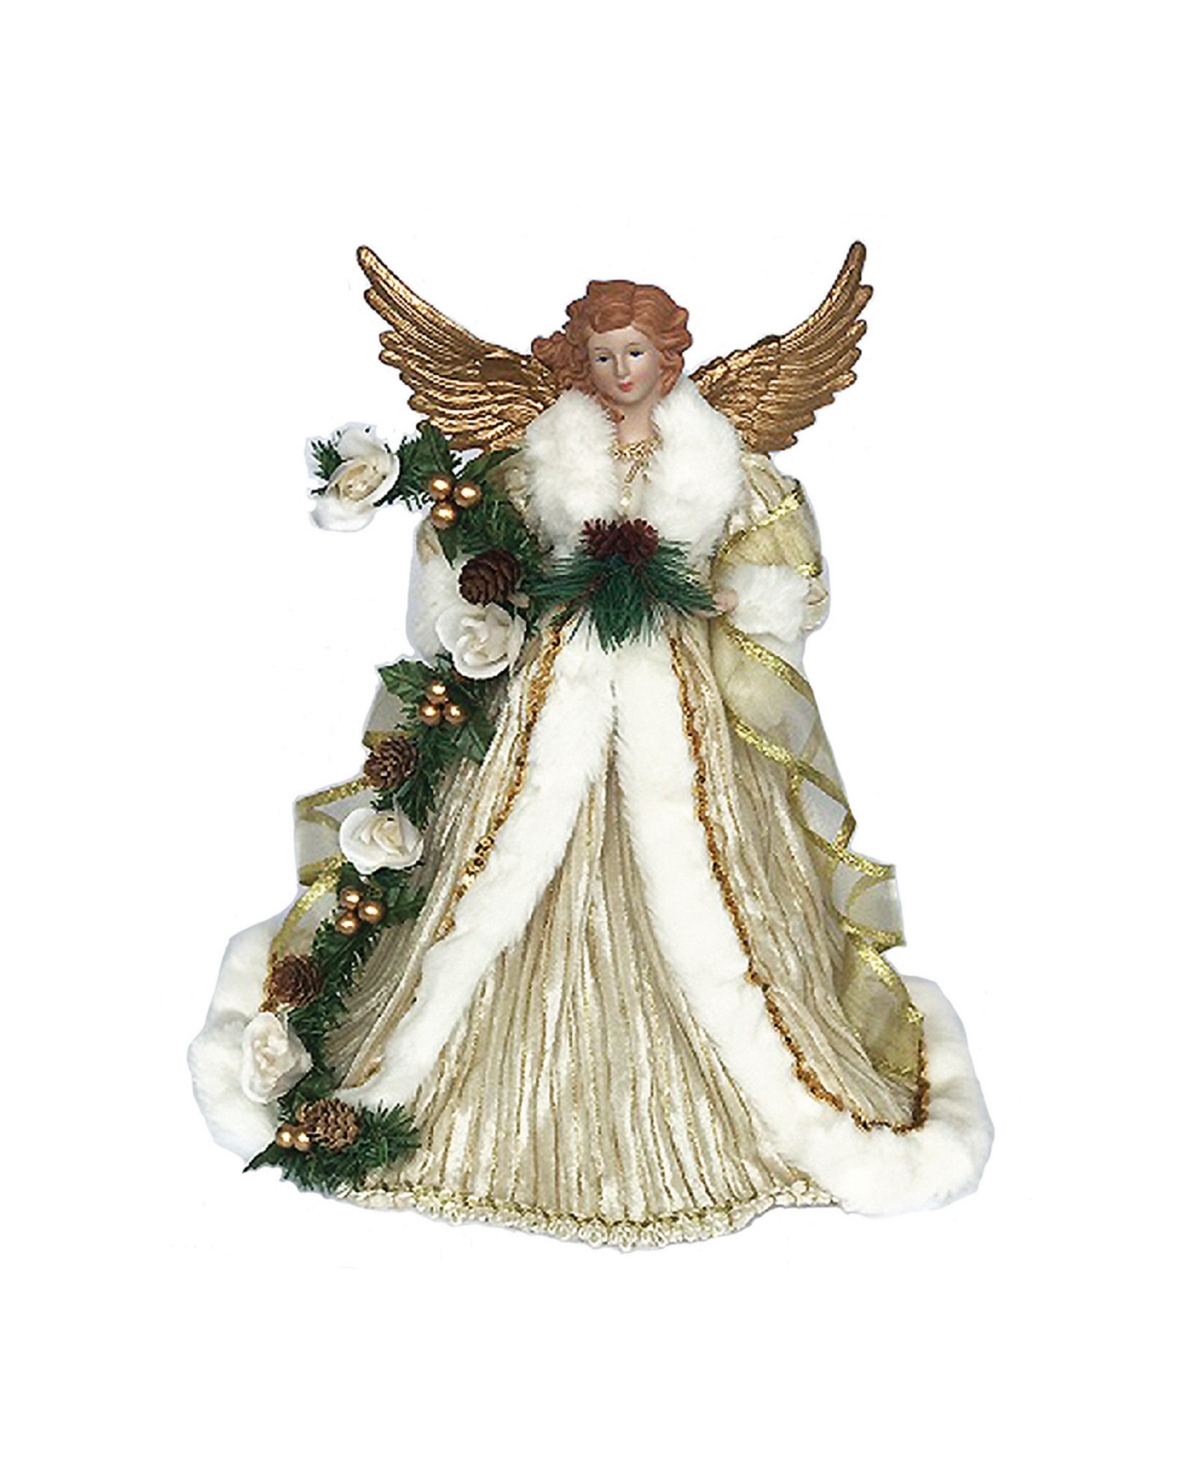 15" Trimmed Angel Tree Topper - Gold